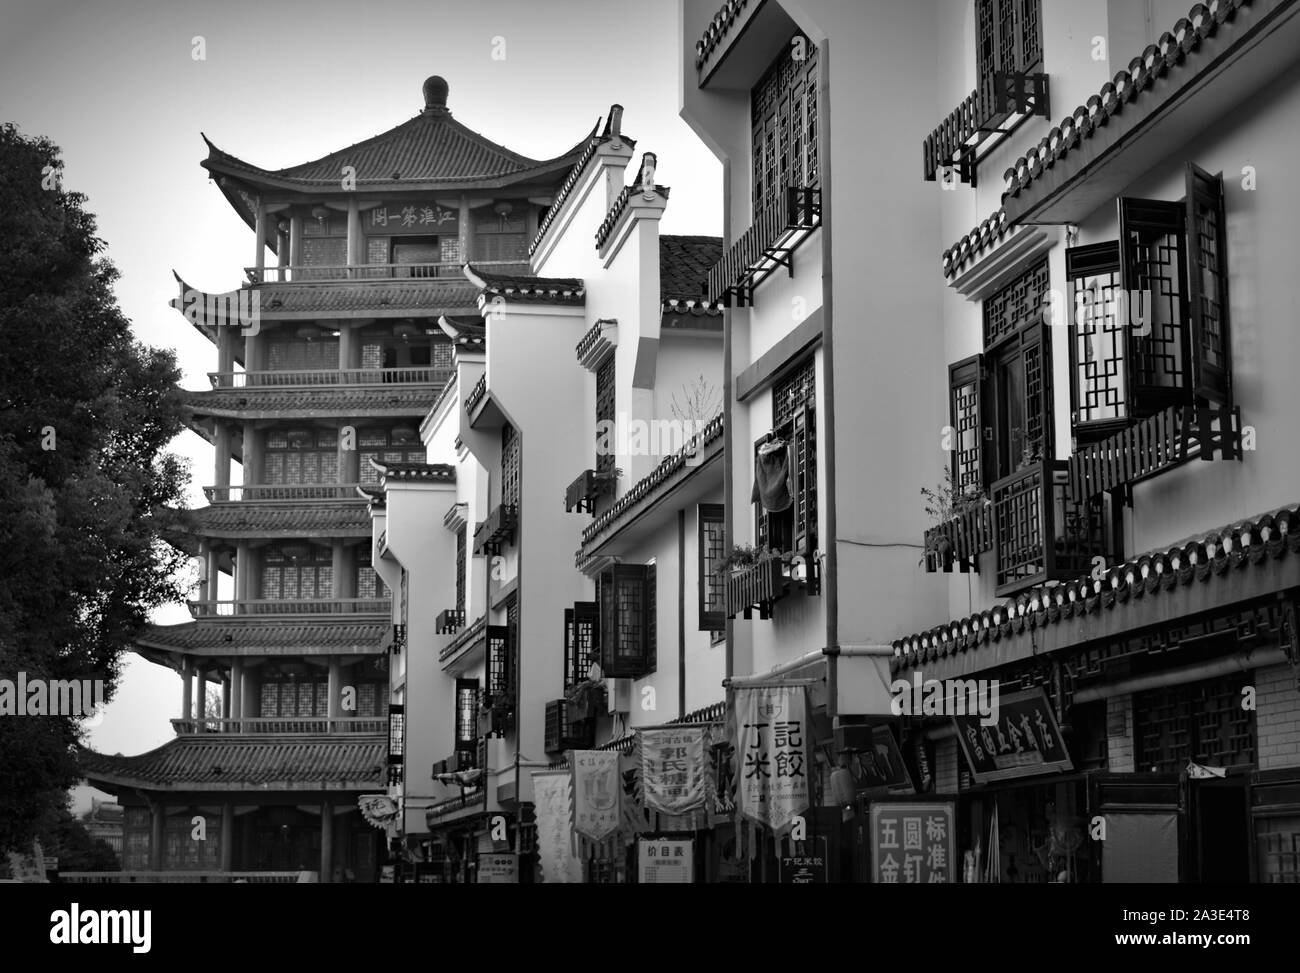 Pagoda and Chinese architecture in Sanhe ancient town, Anhui, China - black and white Stock Photo